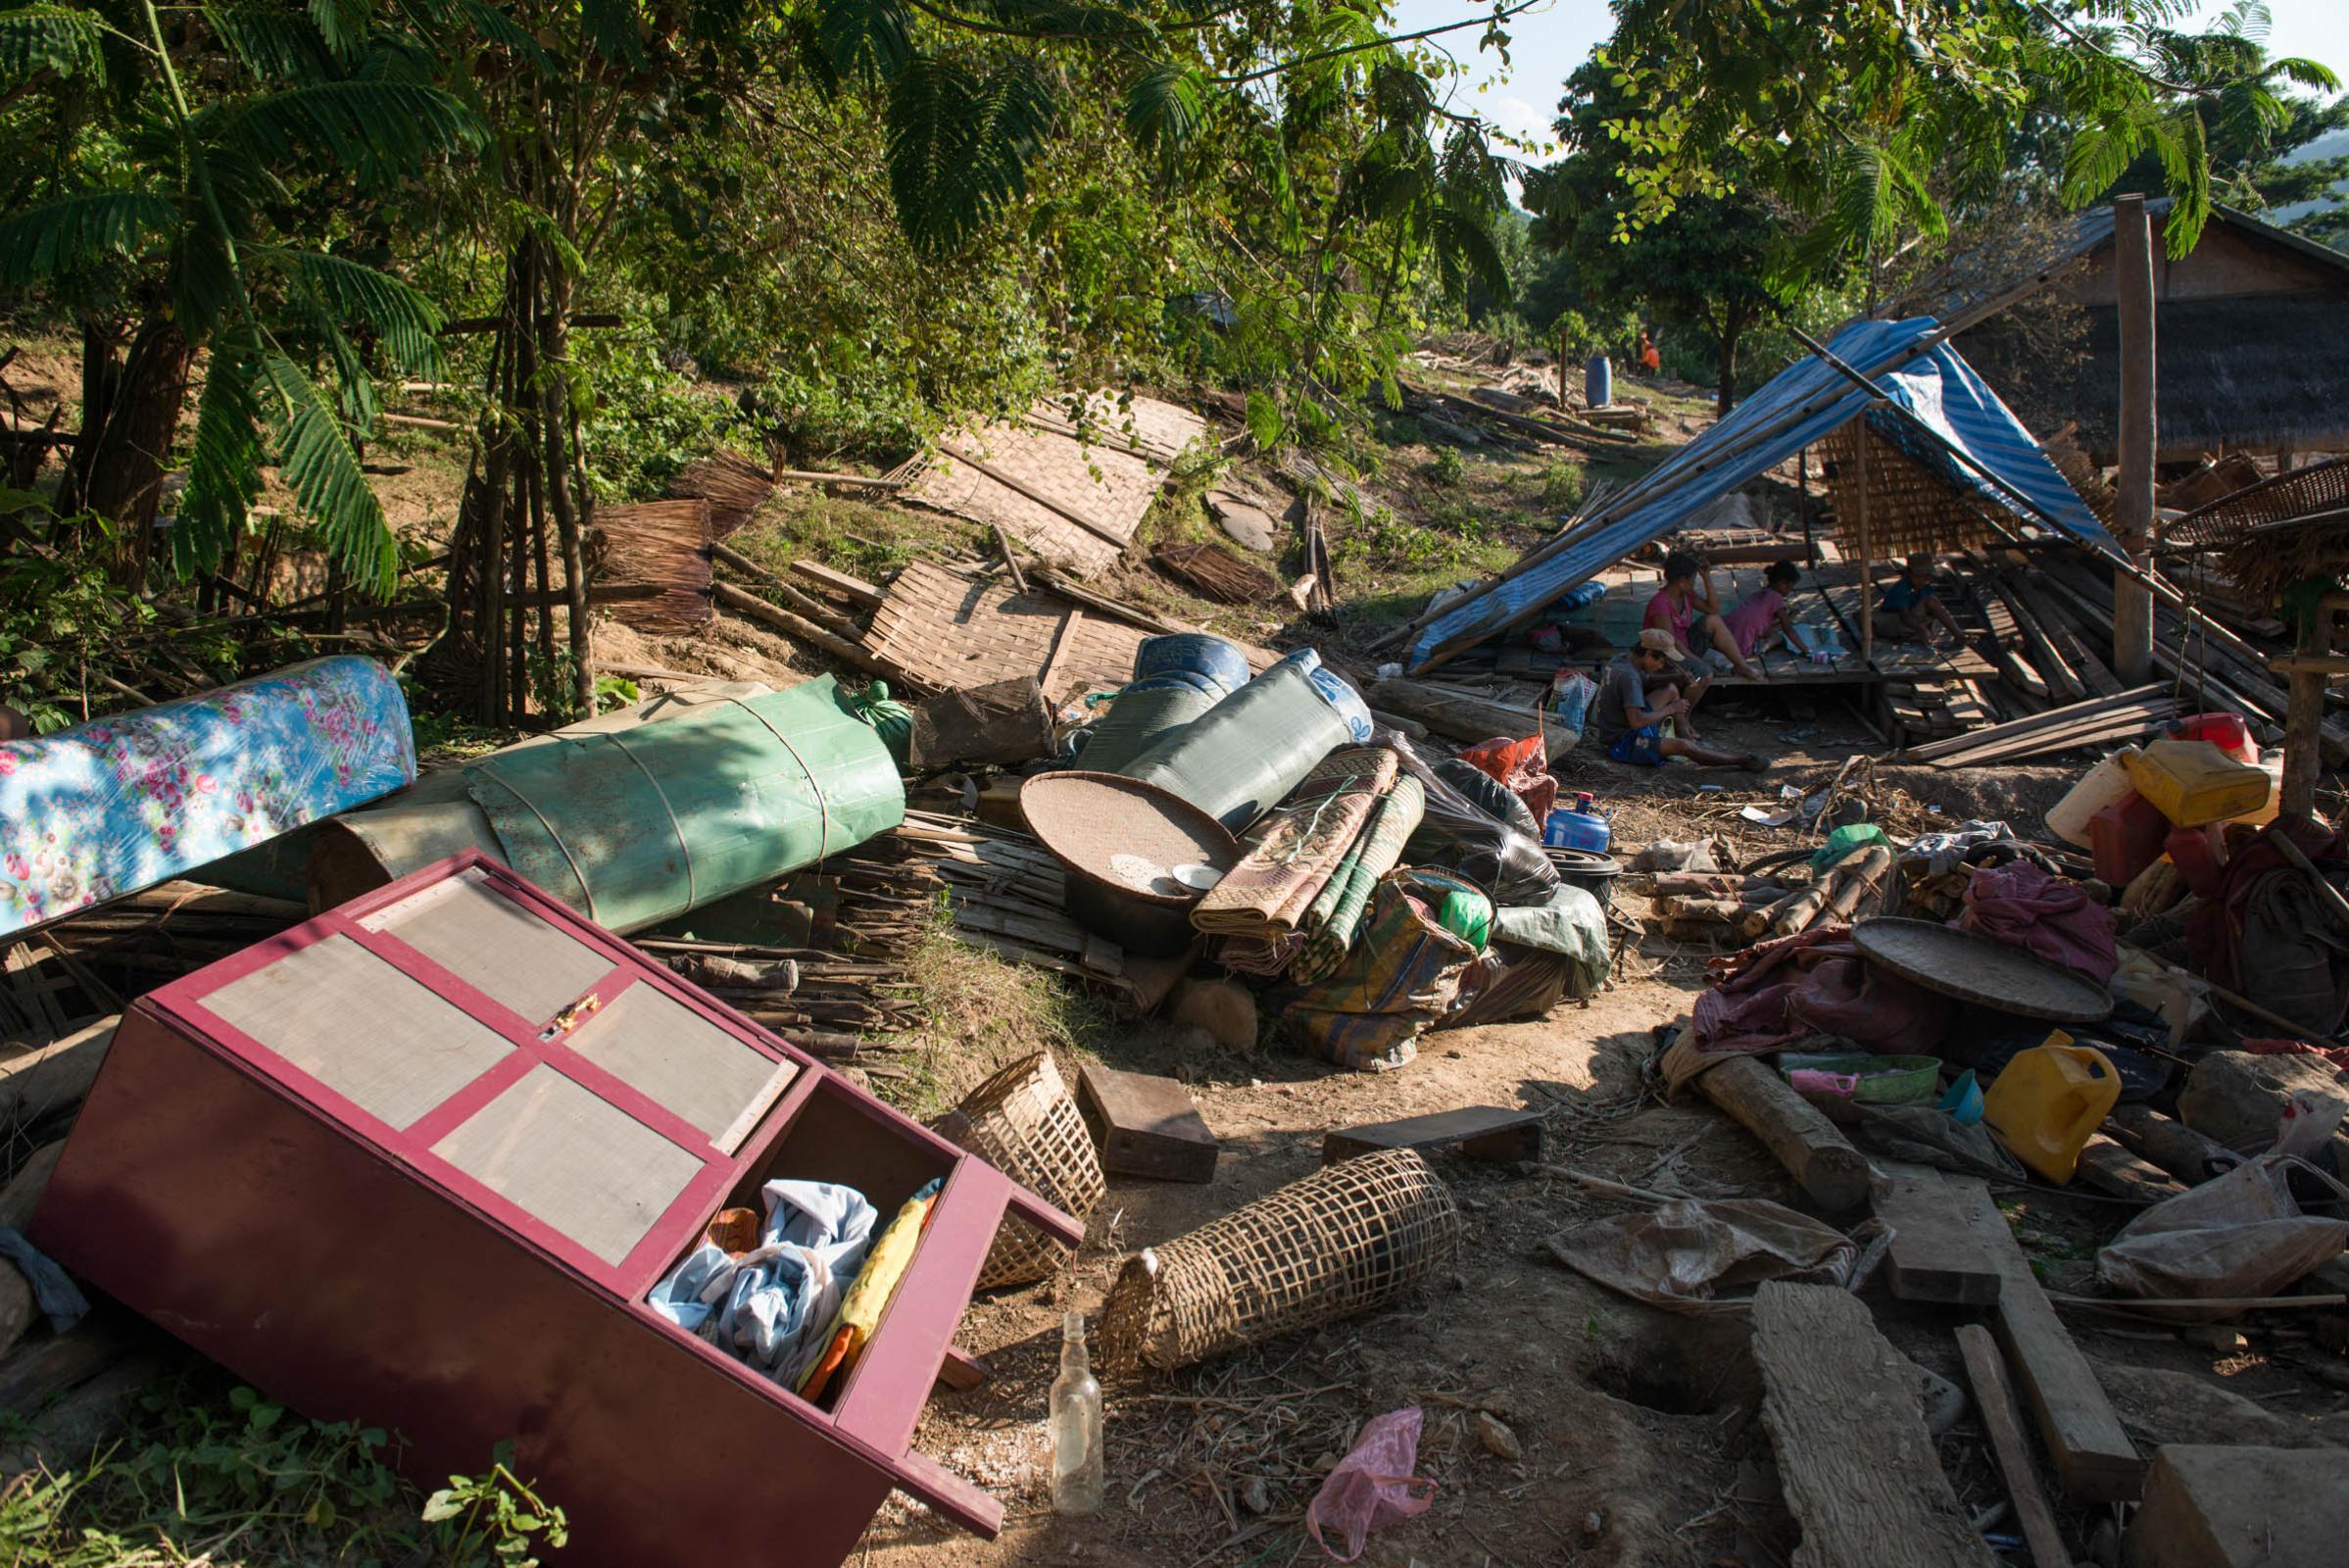 Damming The Mekong River - The houses have been demolished. The villagers are...